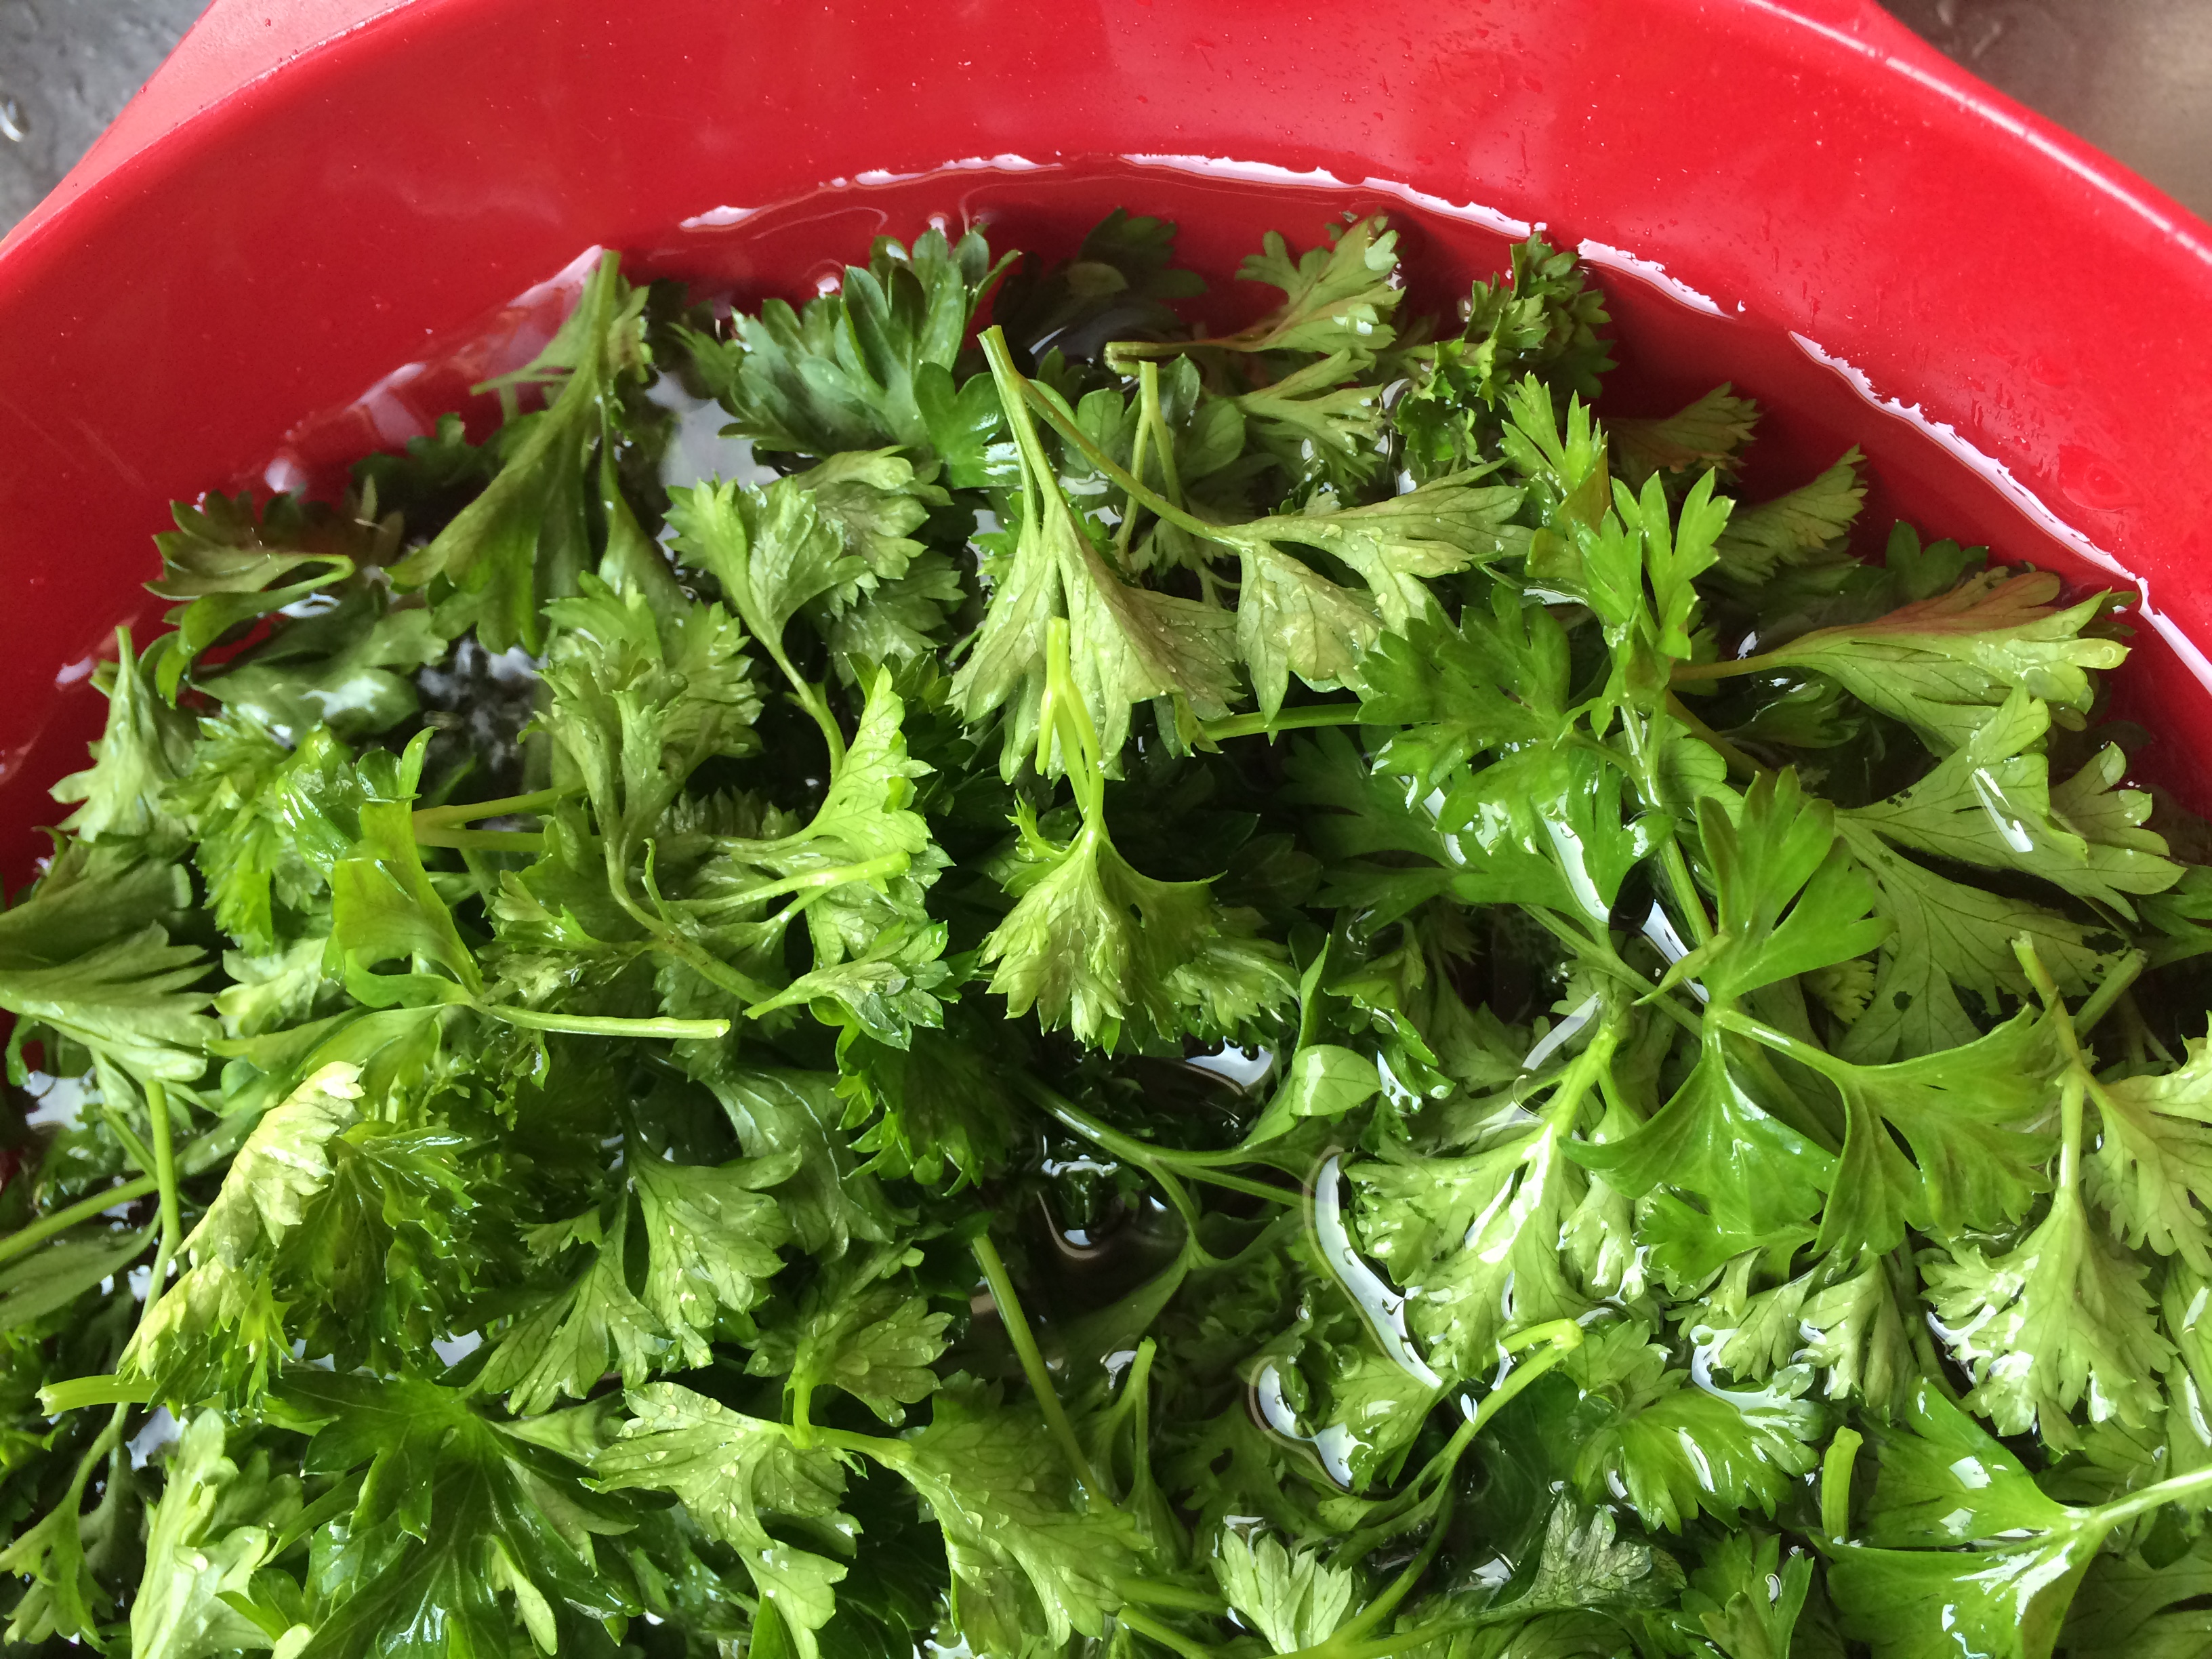 Parsley being washed in water